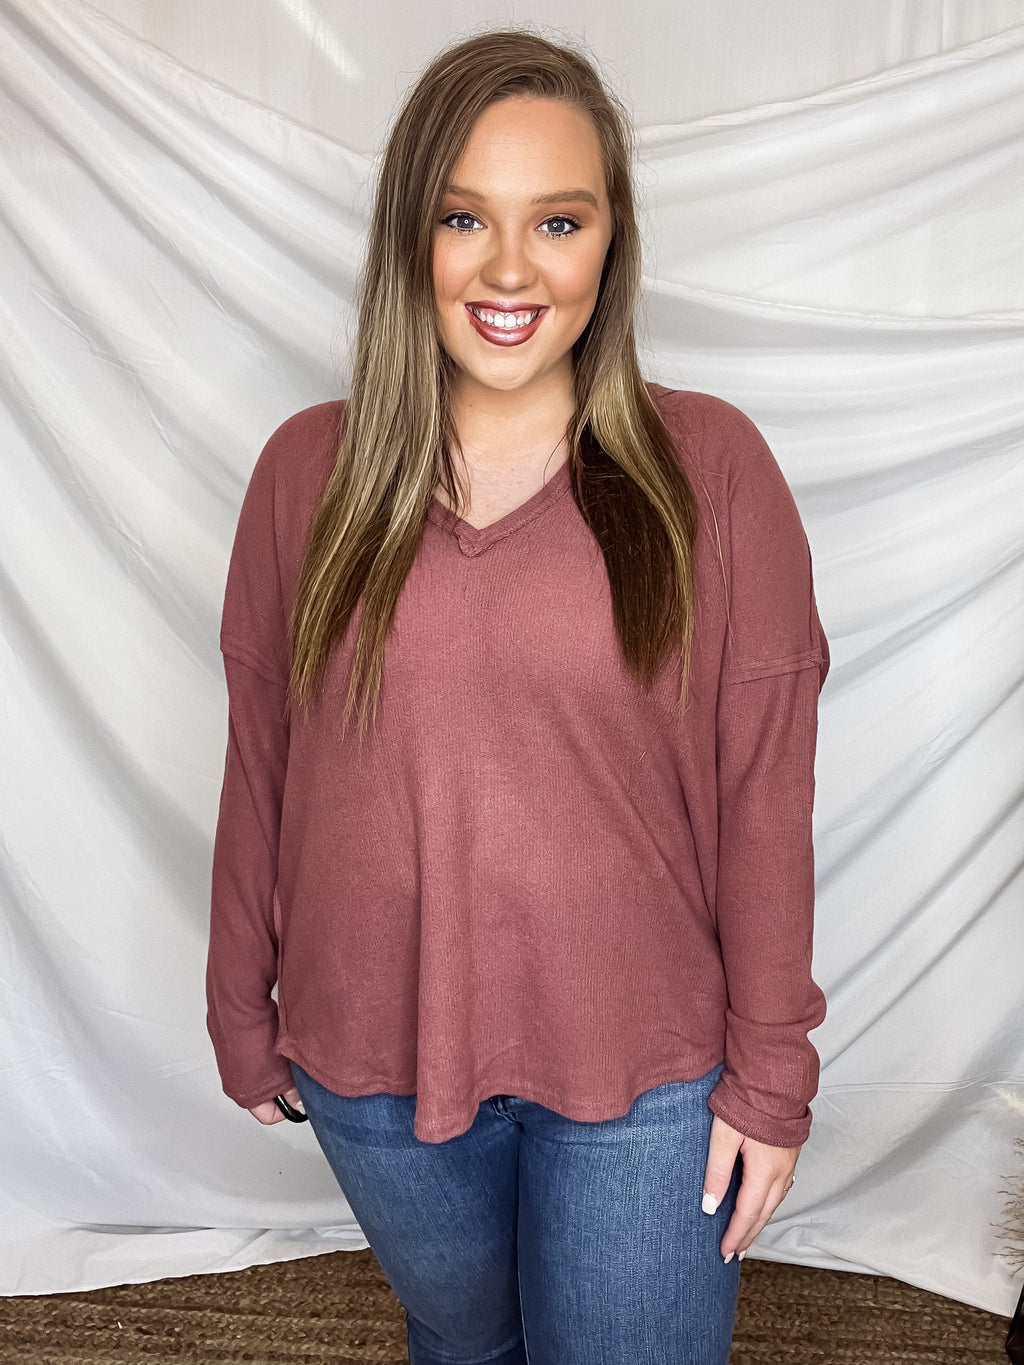 Top features a marsala colored base, long sleeves, light weight material, V-neck line and runs true to size! 